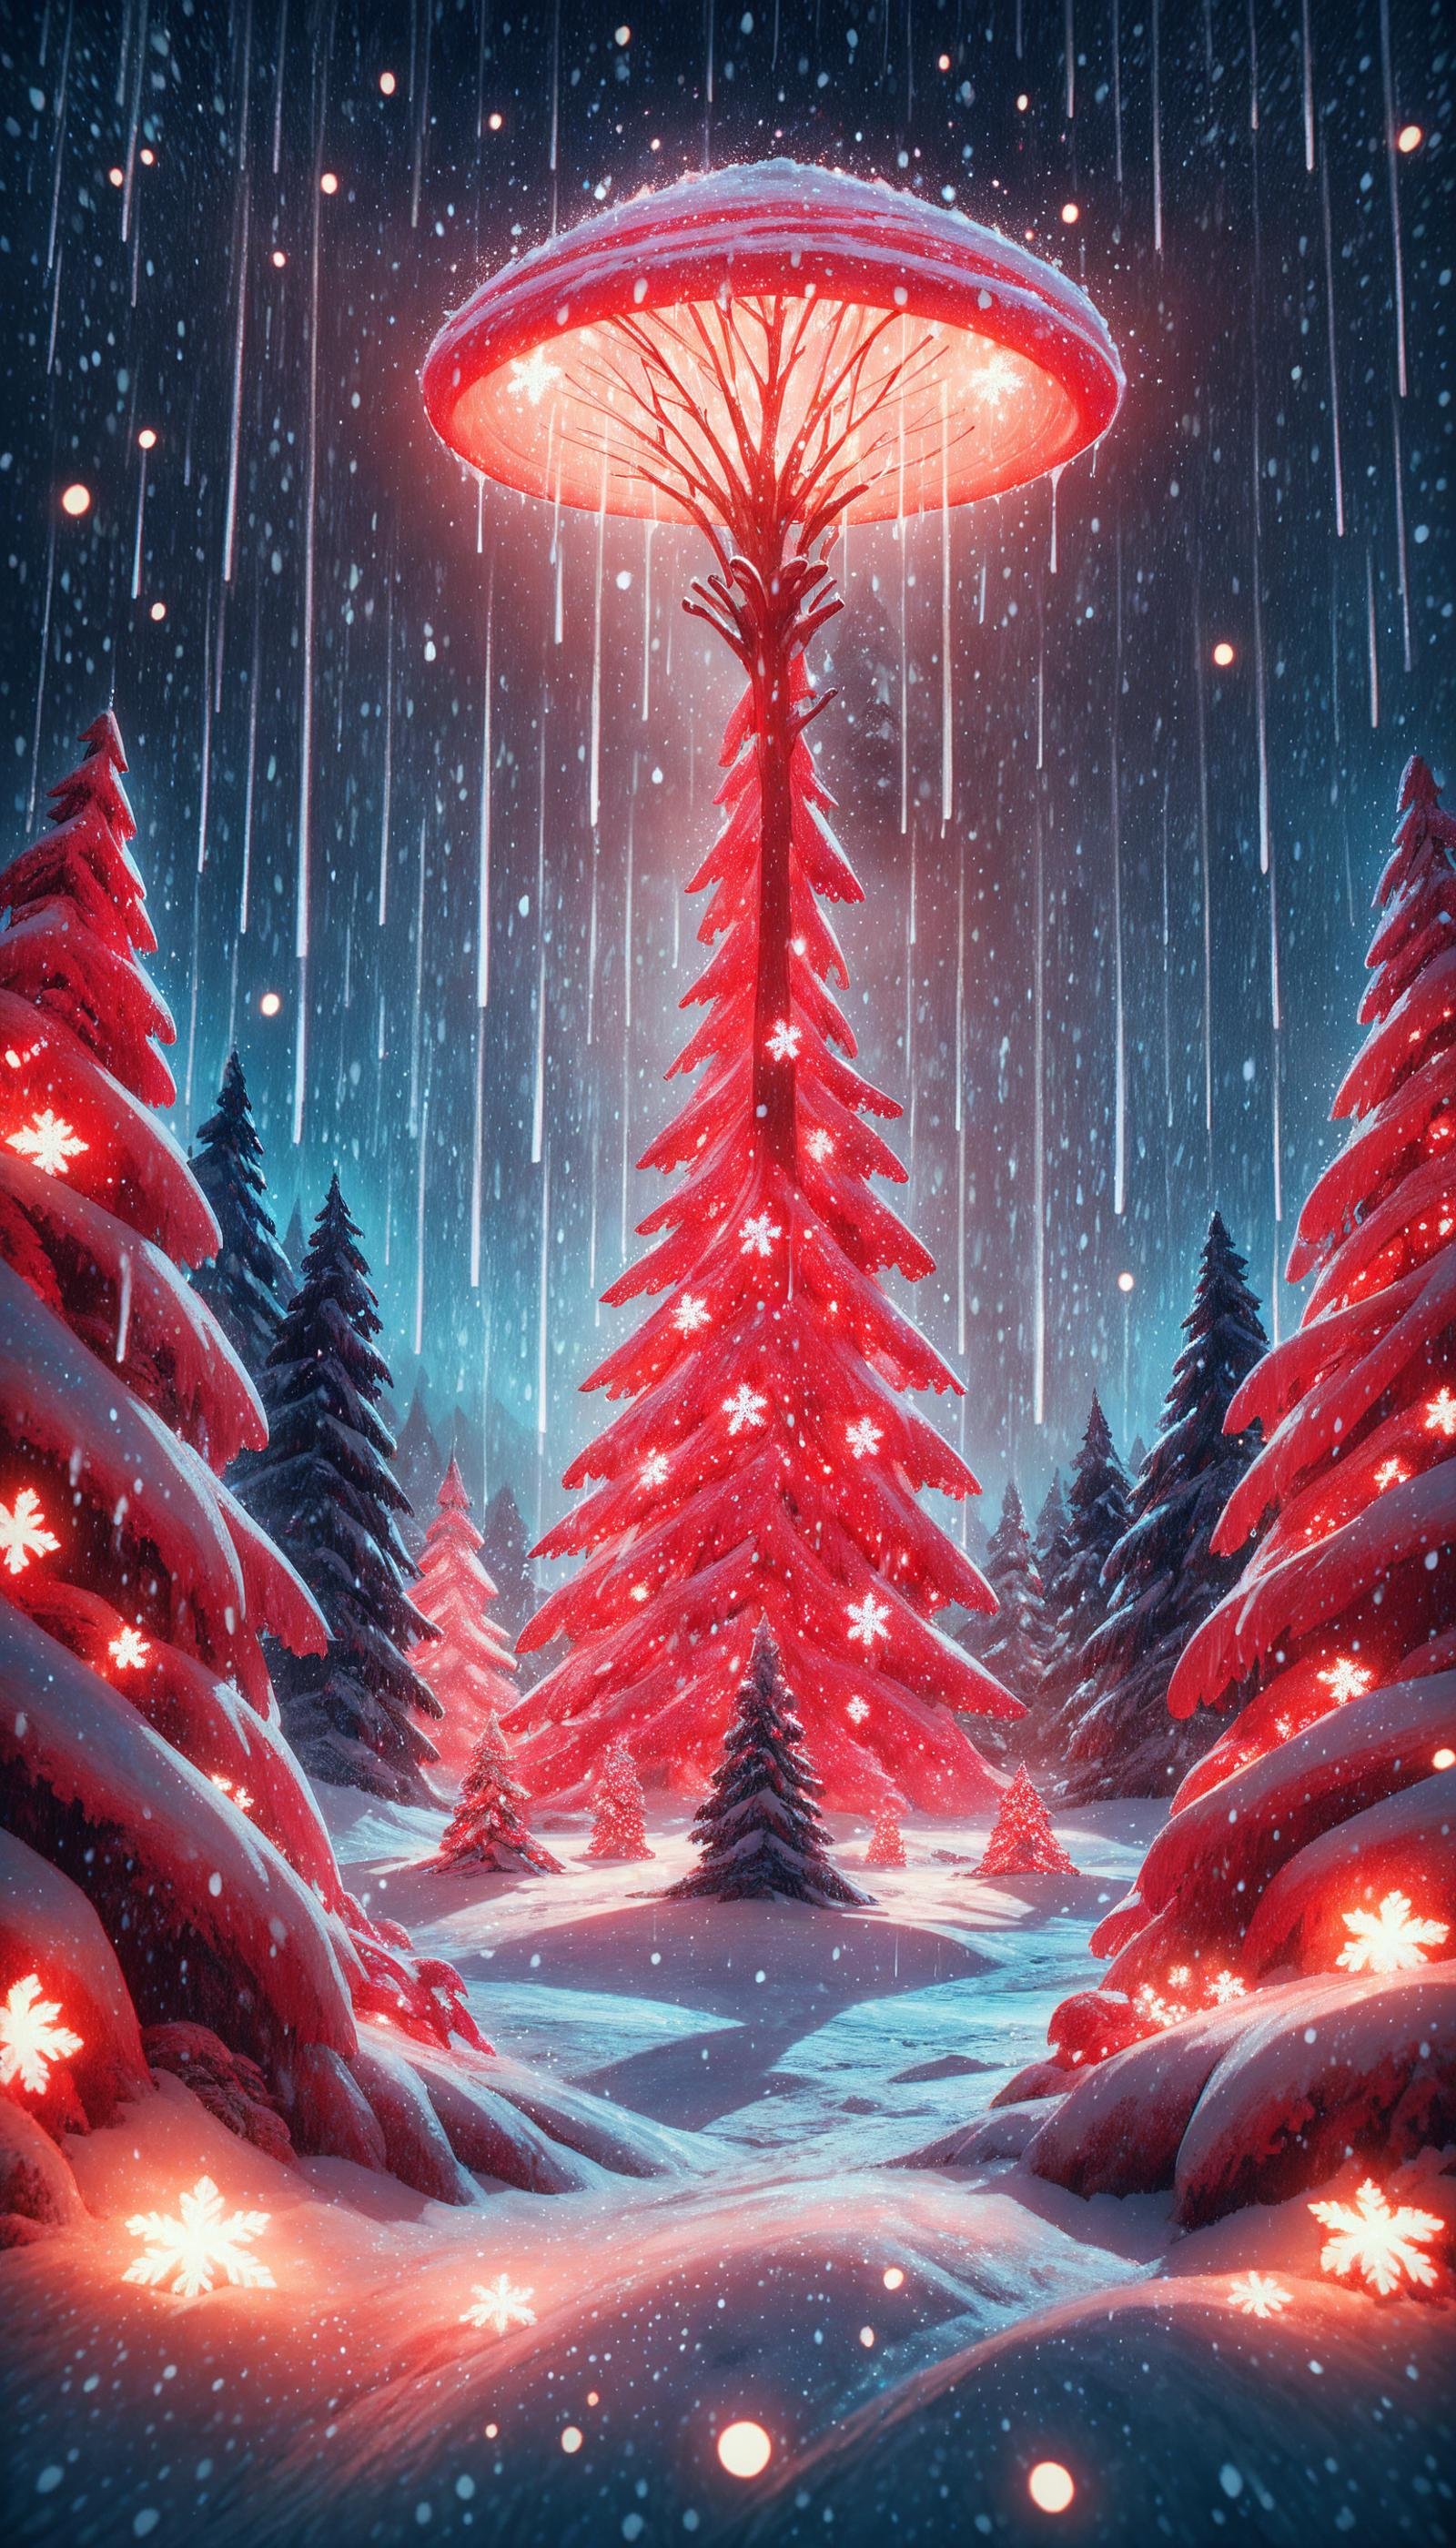 score_9, score_8_up, score_7_up, score_6_up, <lora:ChristmasWinteryPony:0.6> ChristmasWintery neon fungi glowing mysteriously on a tree trunk during a rainy night, snowing, cold, frozen, snow on top, (Masterpiece:1.3) (best quality:1.2) (high quality:1.1)